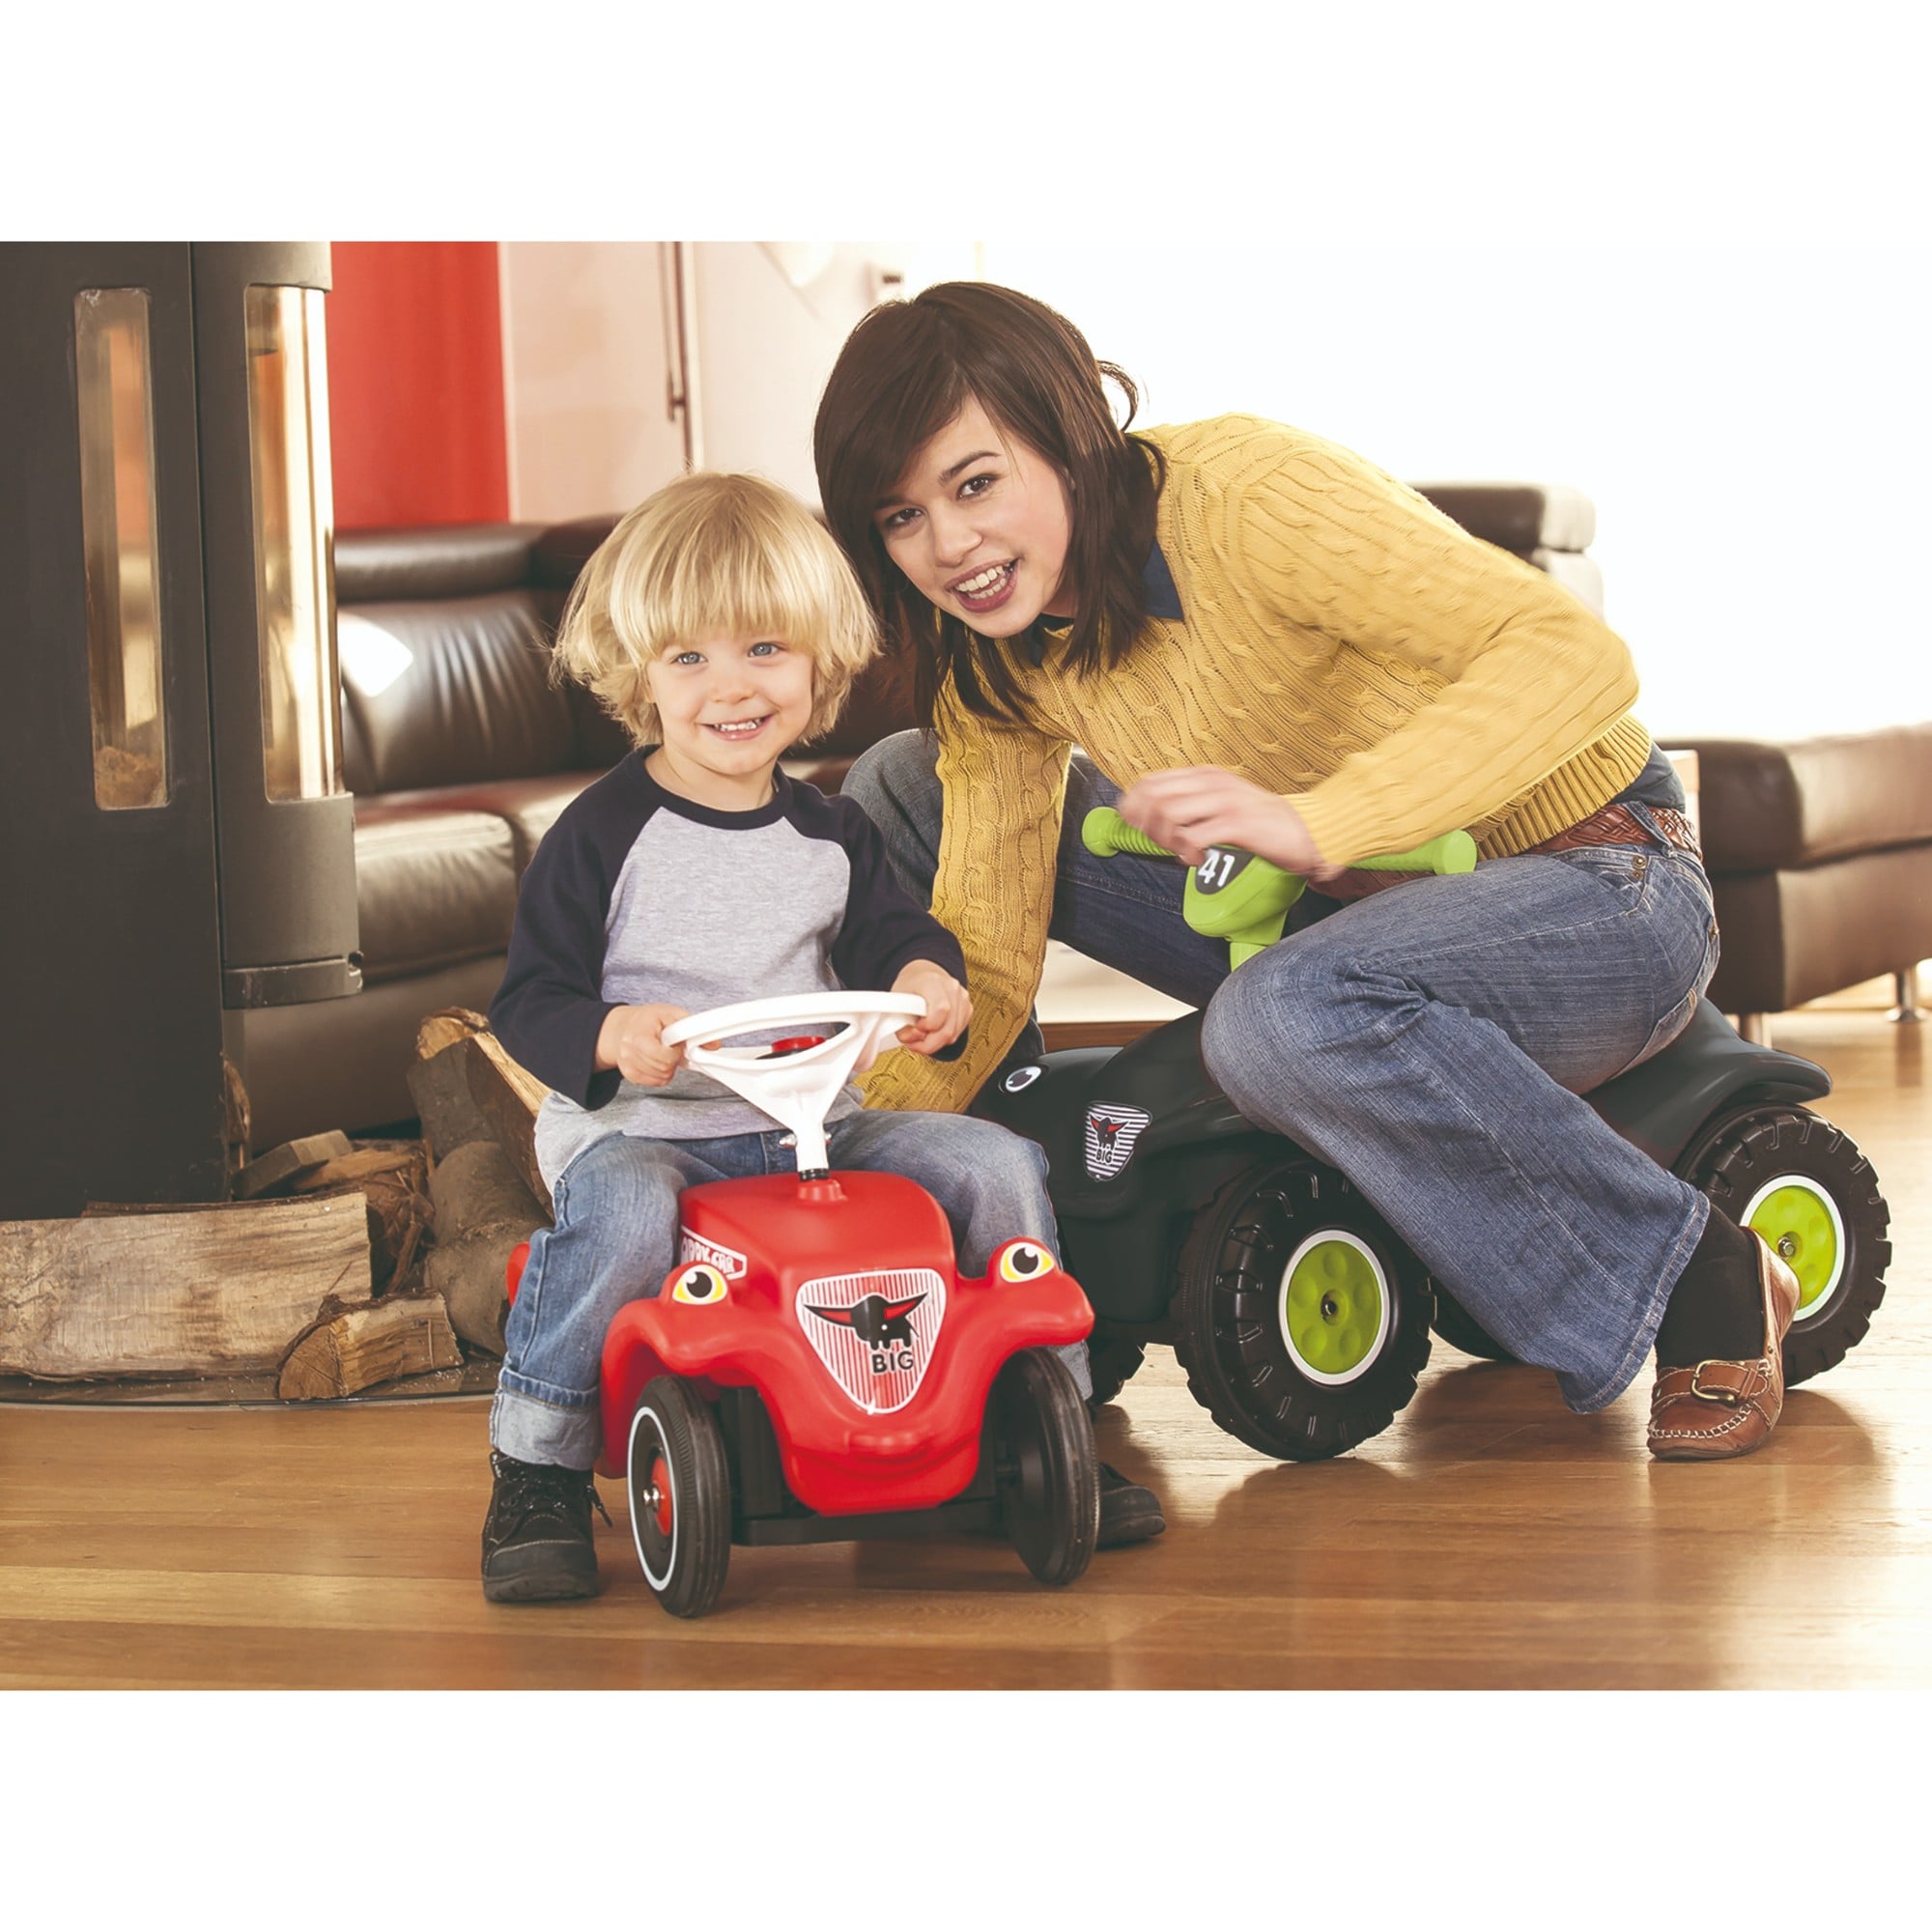 BIG Kids Riding Toy with Ergonomic Seat, 31-in Height, 59-in